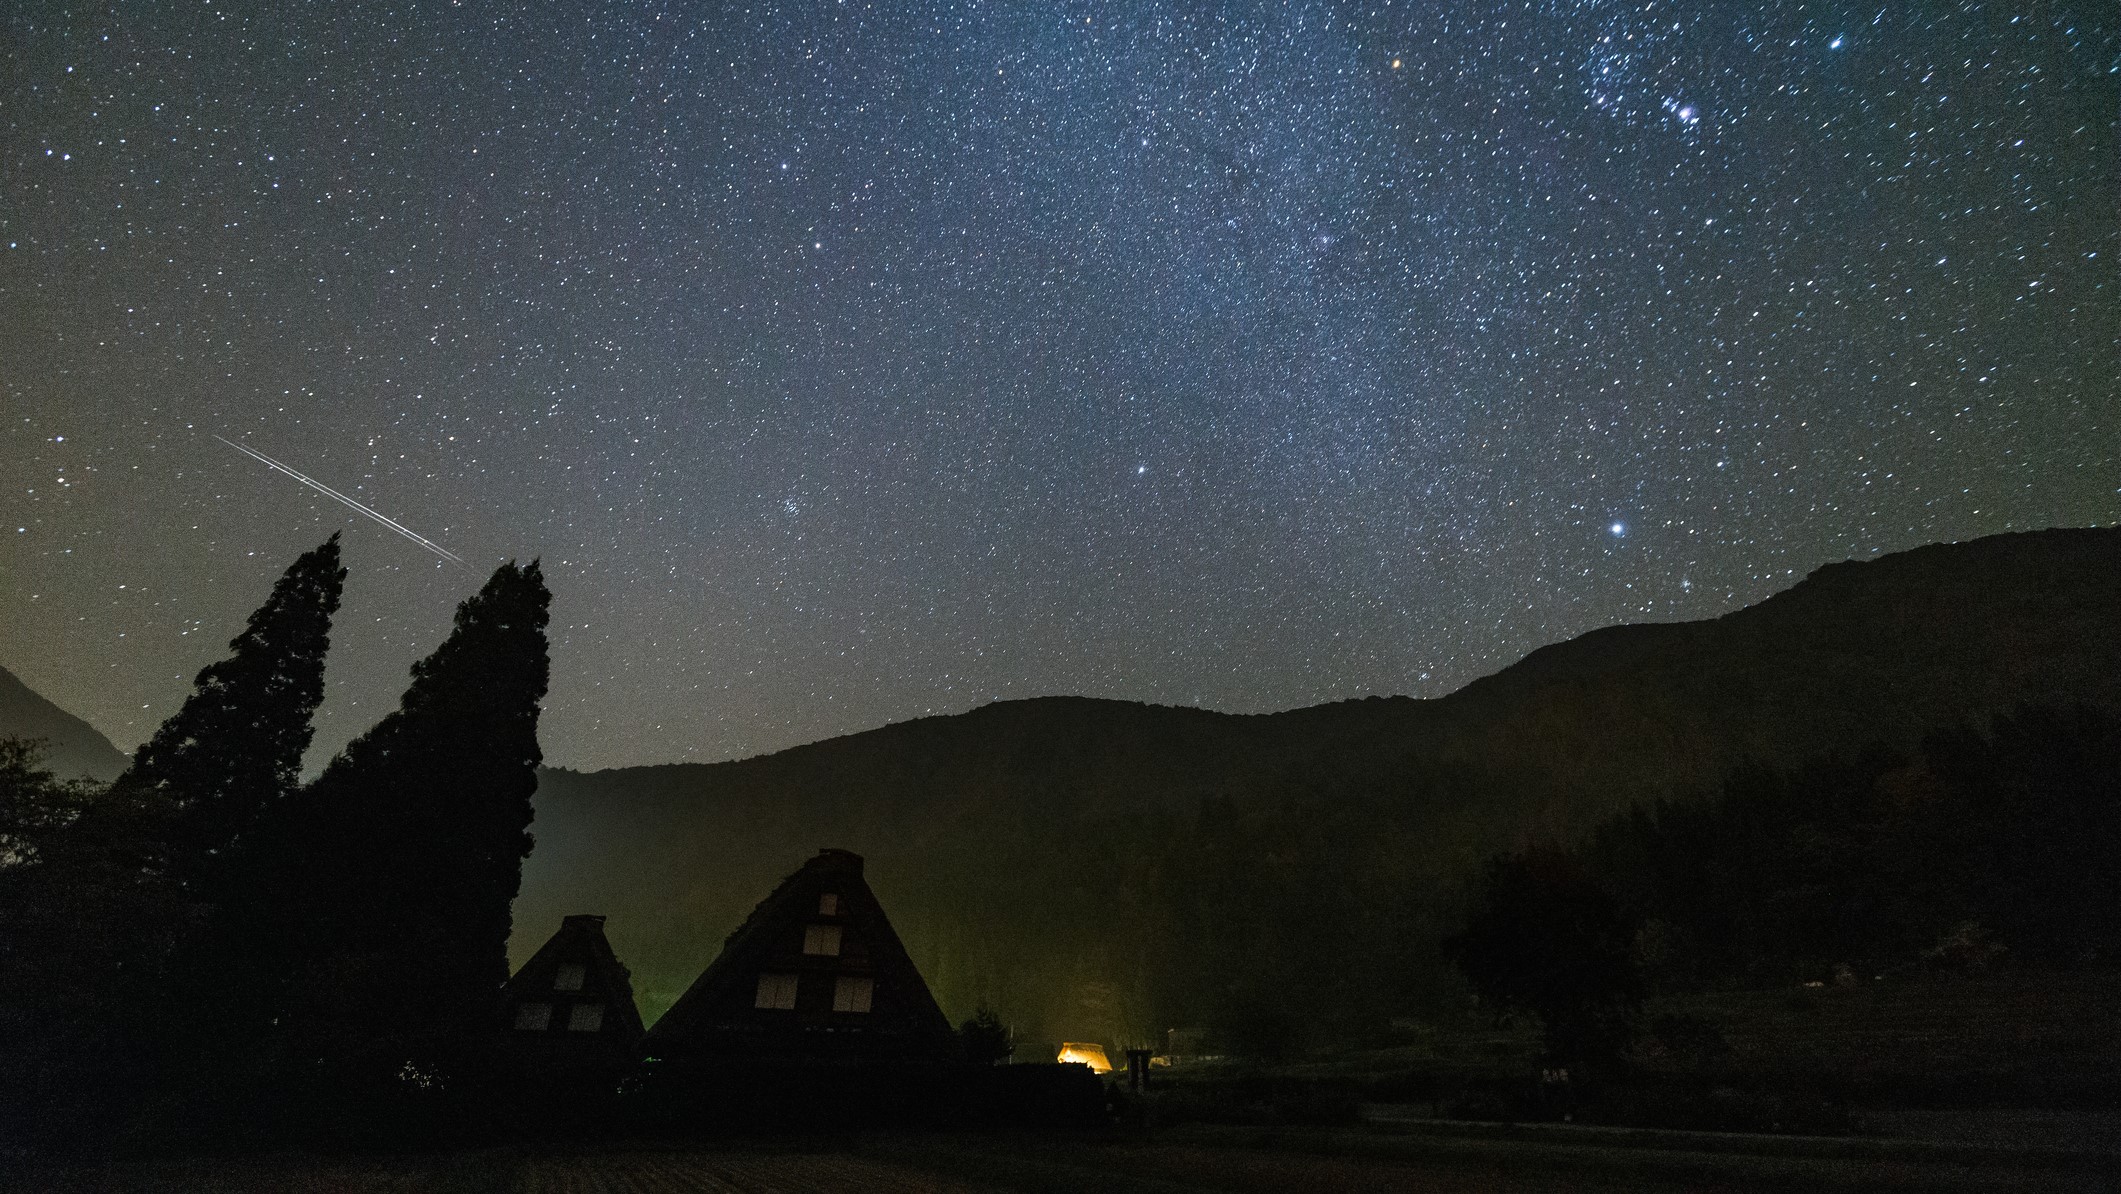 The Orionid meteor shower is a result of Halley's Comet. This photograph shows an Orionid meteor shower above Shirakawa-go, Japan.